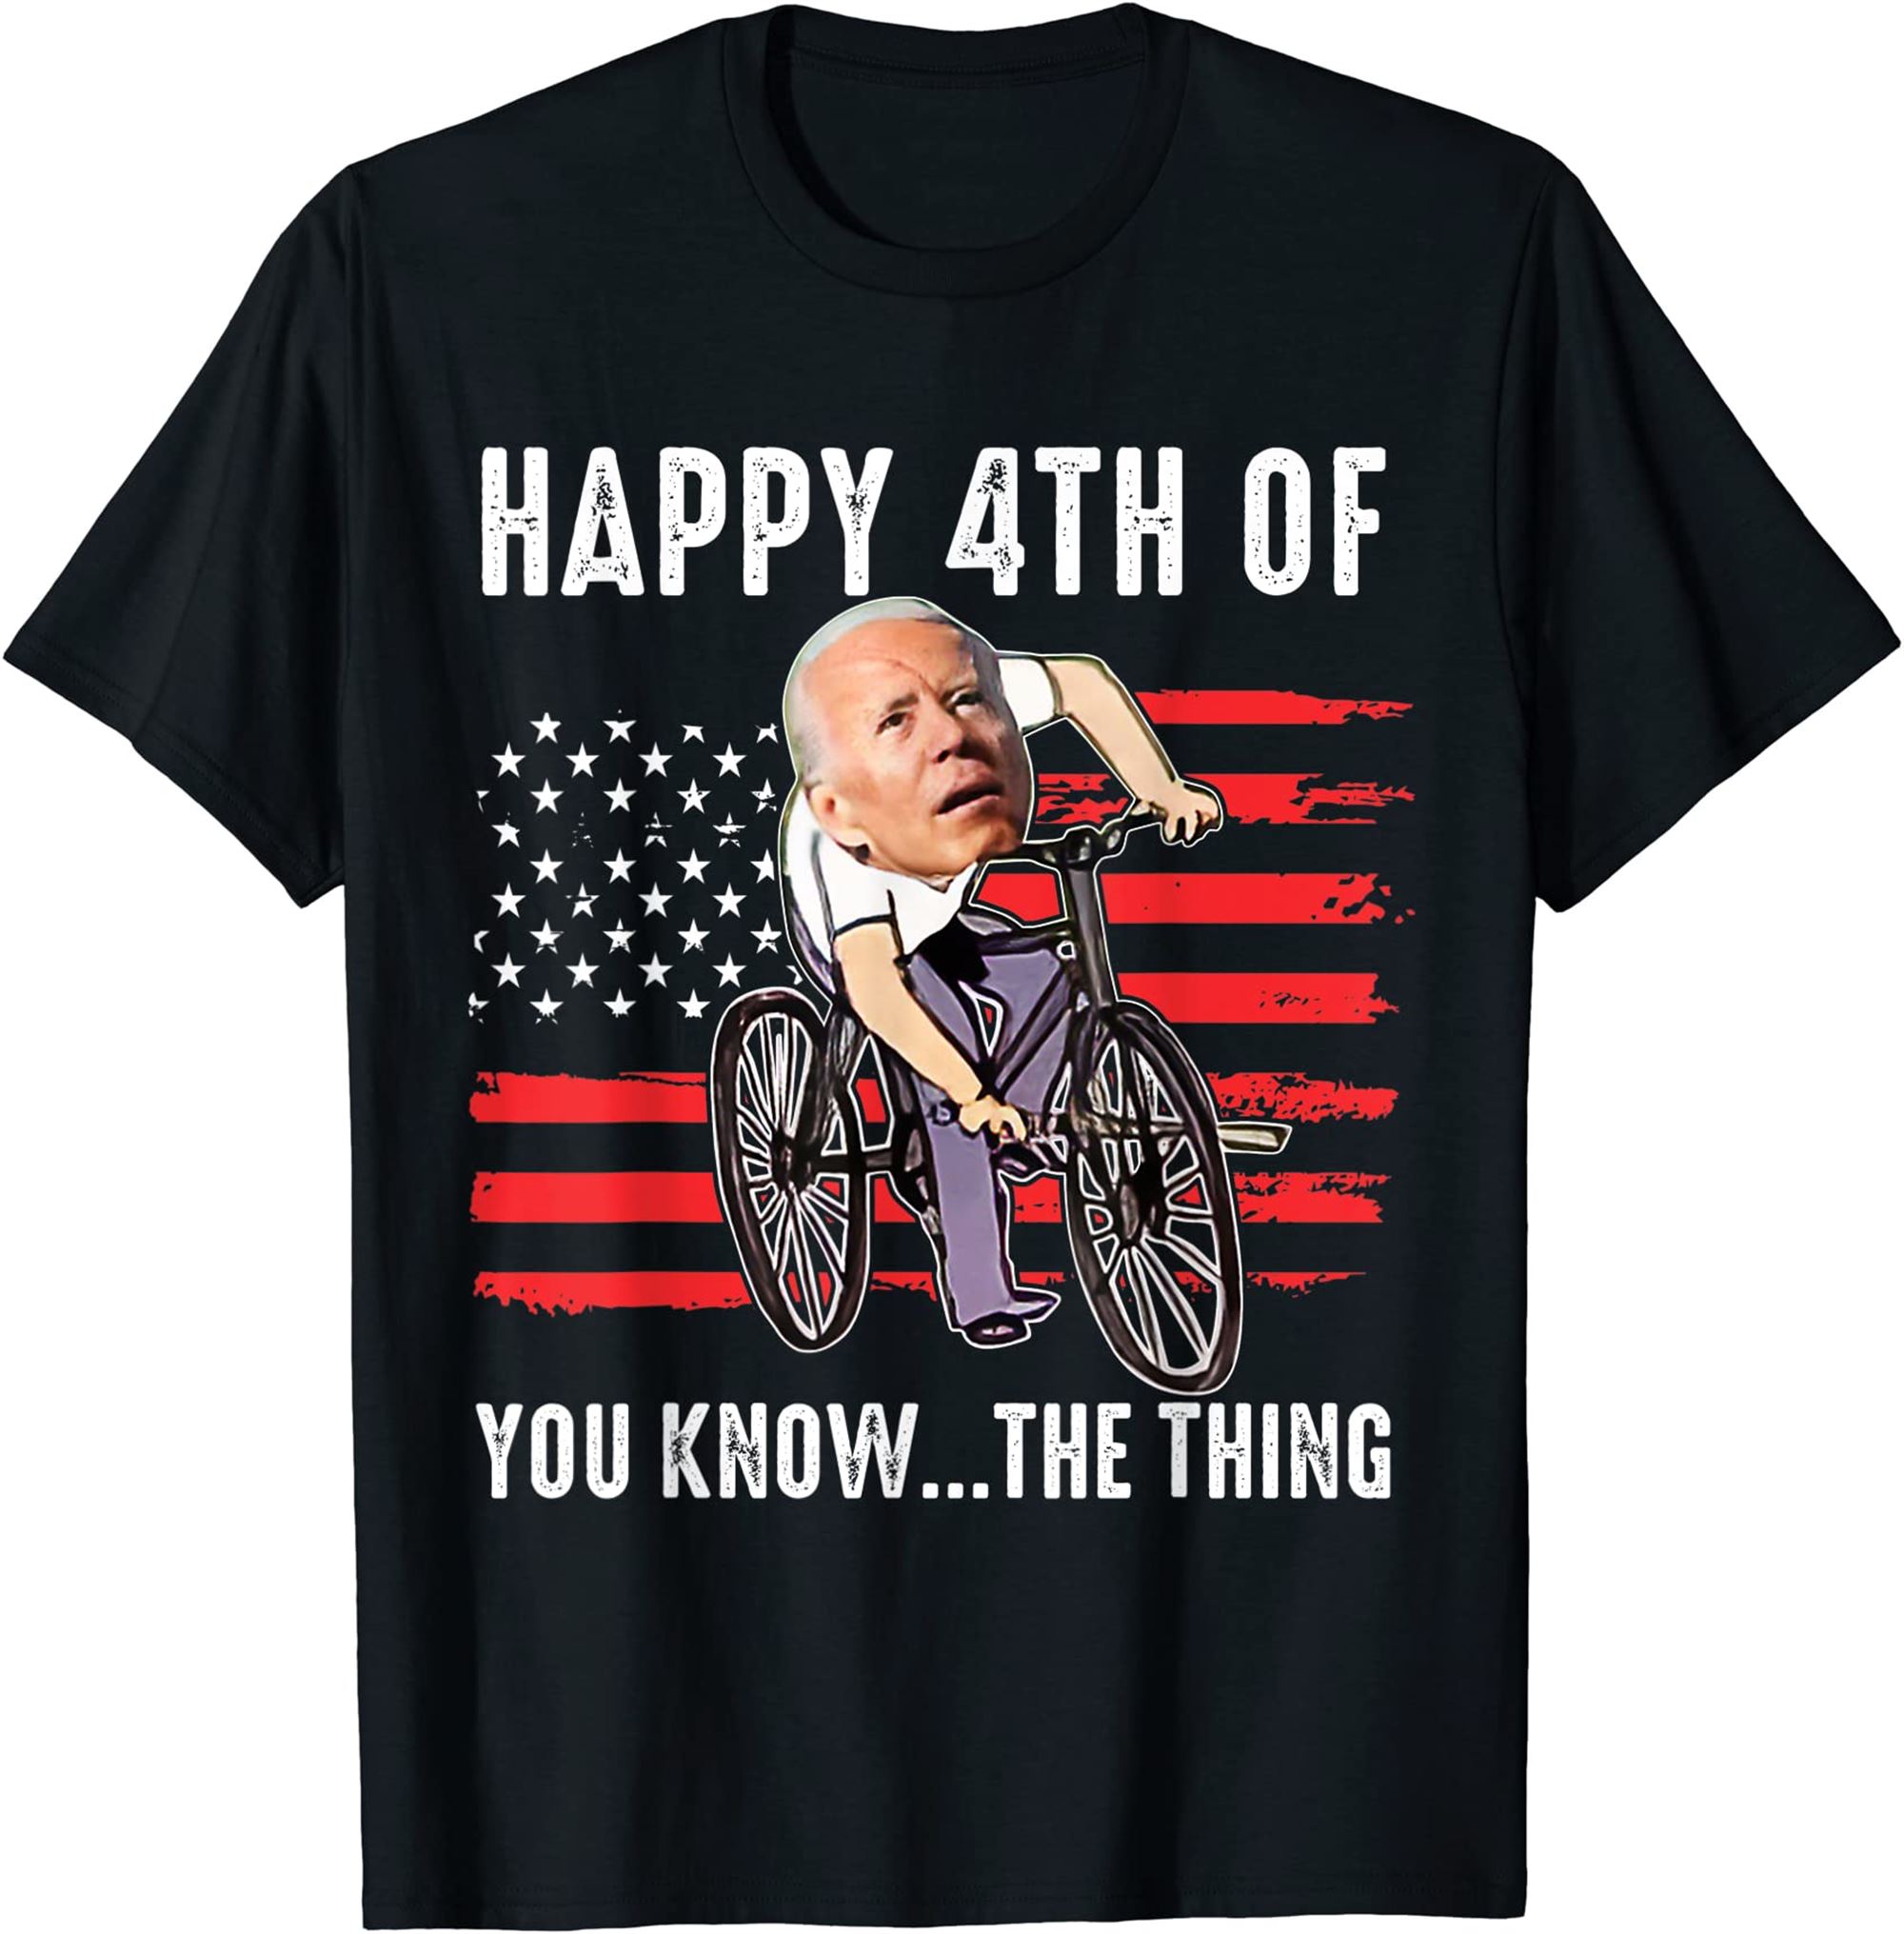 Joe Biden Falling Off His Bicycle Funny 4th Of July Us Flag T-shirt Plus Size Up To 5xl